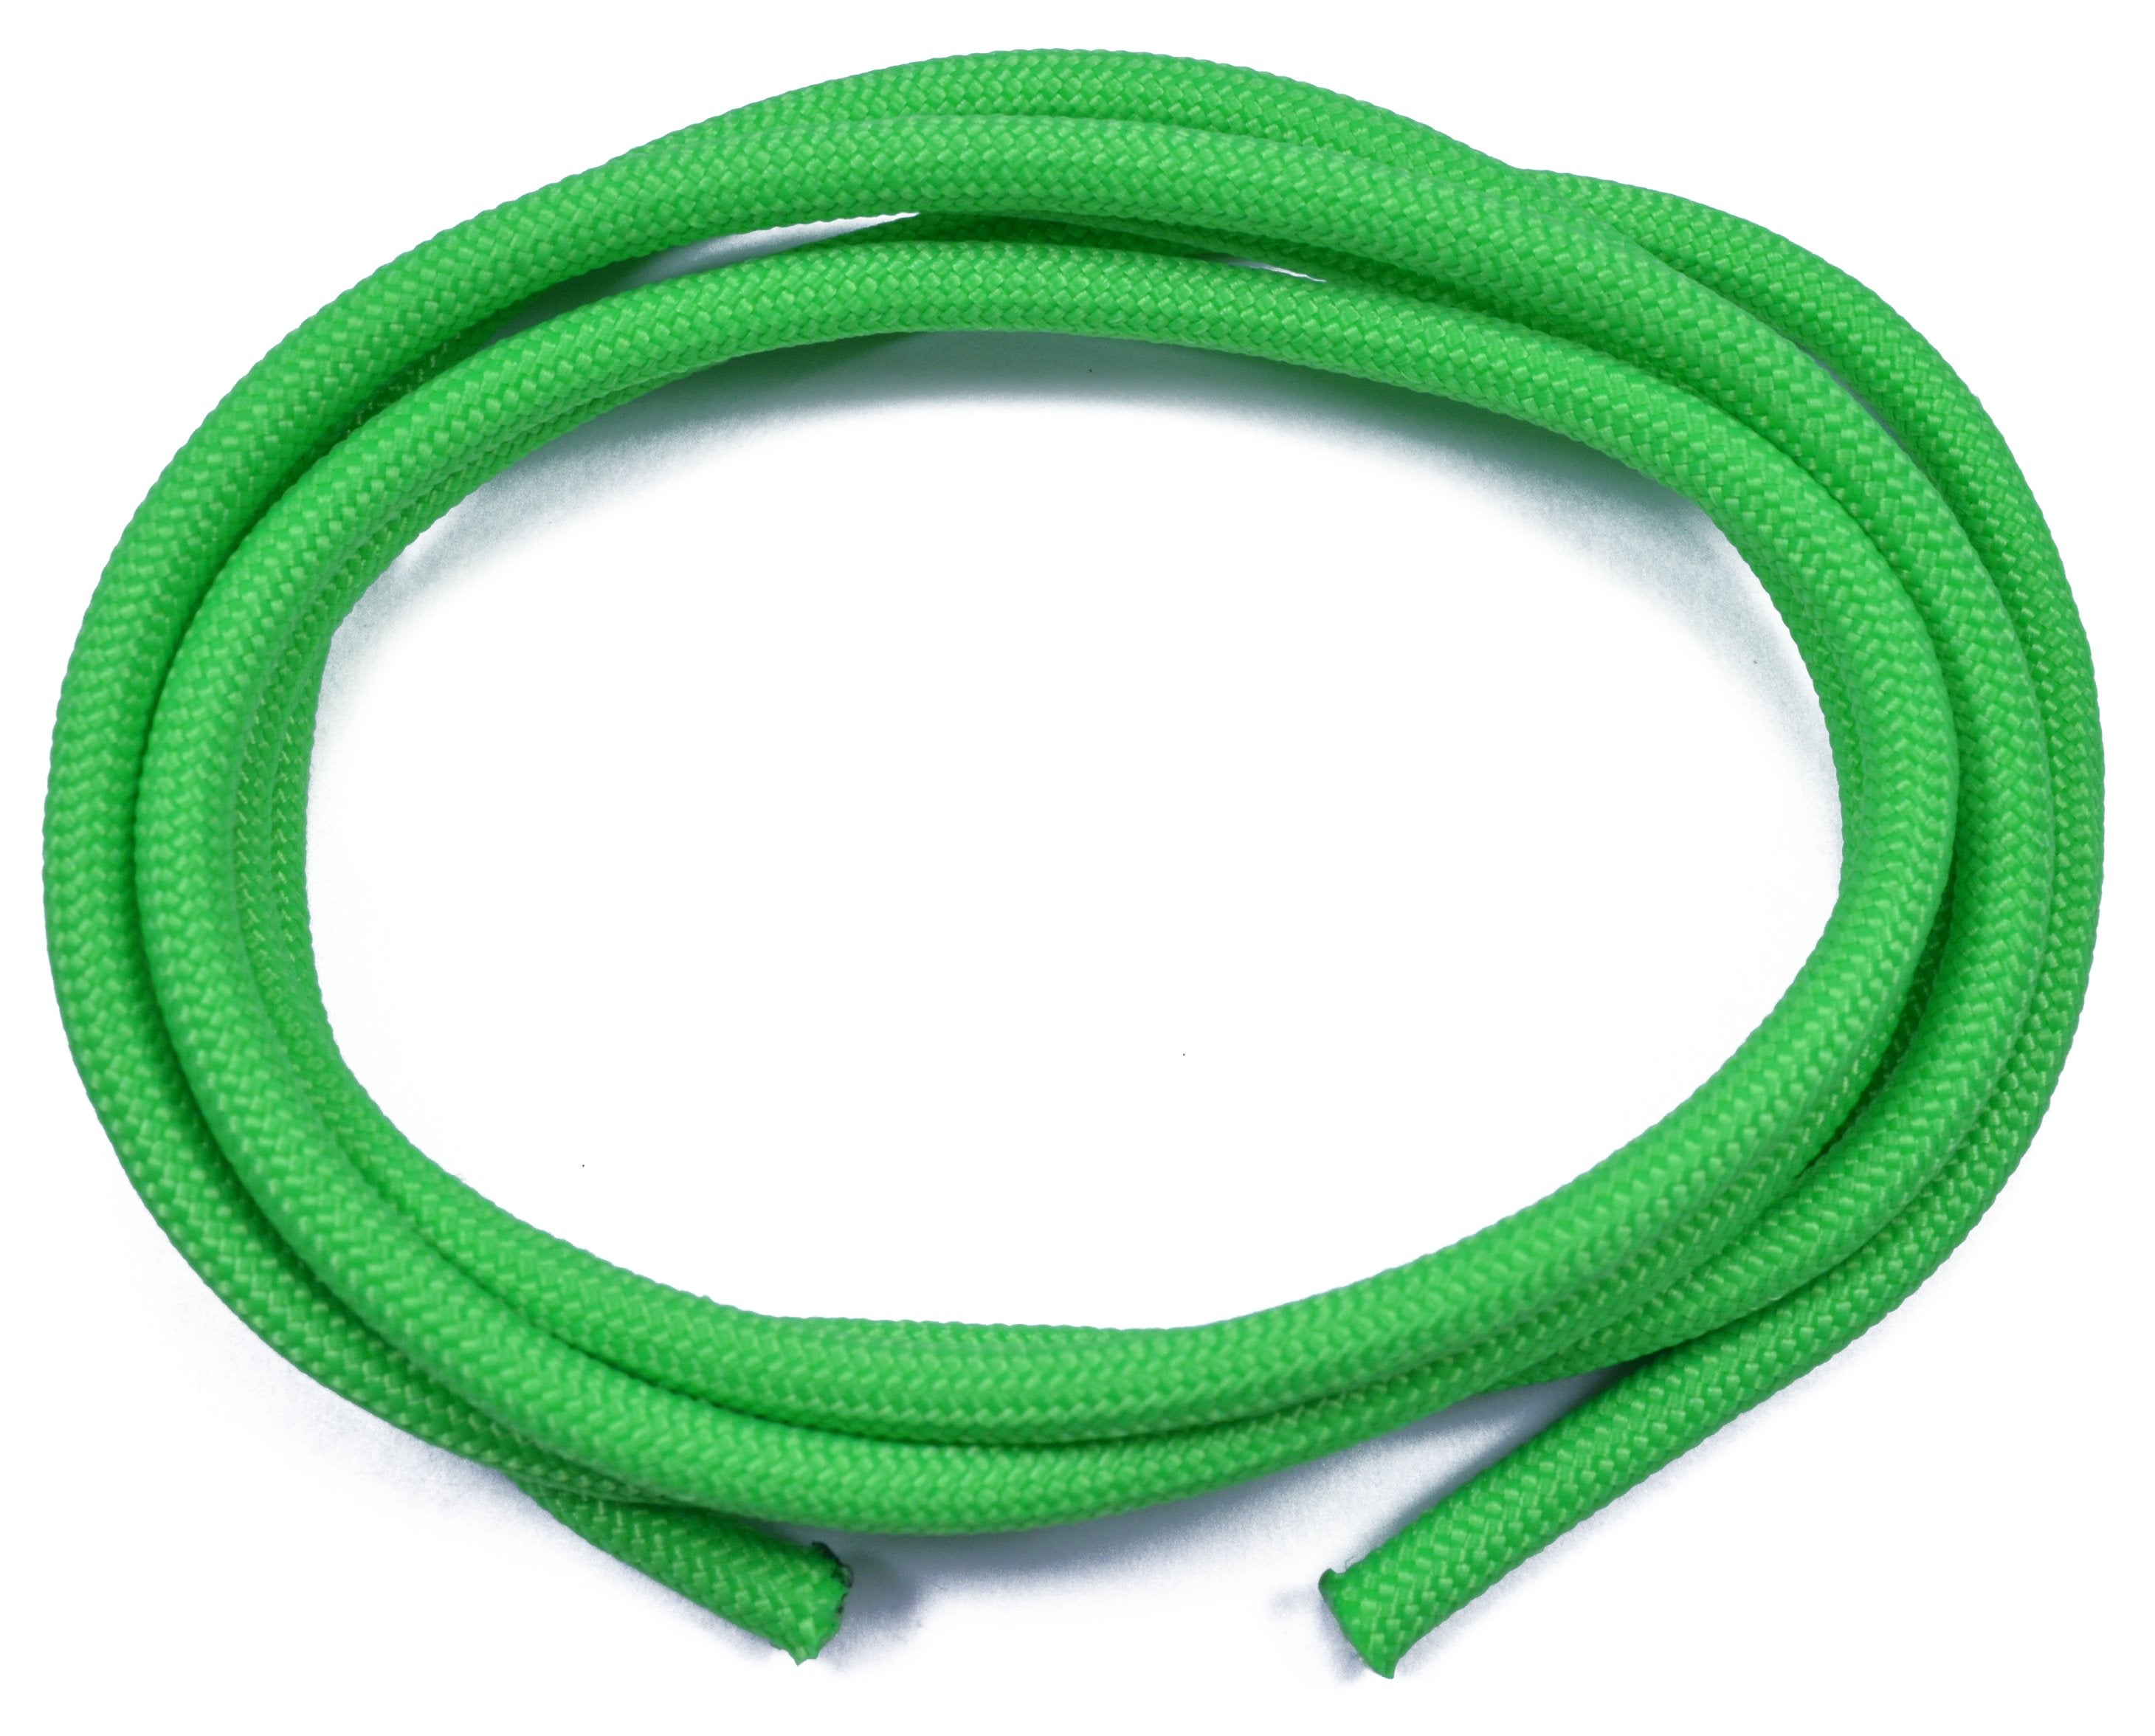 West Coast Paracord Rectangle Carabiners - Multiple Colors and Pack Options, Size: 5 Pack, Green